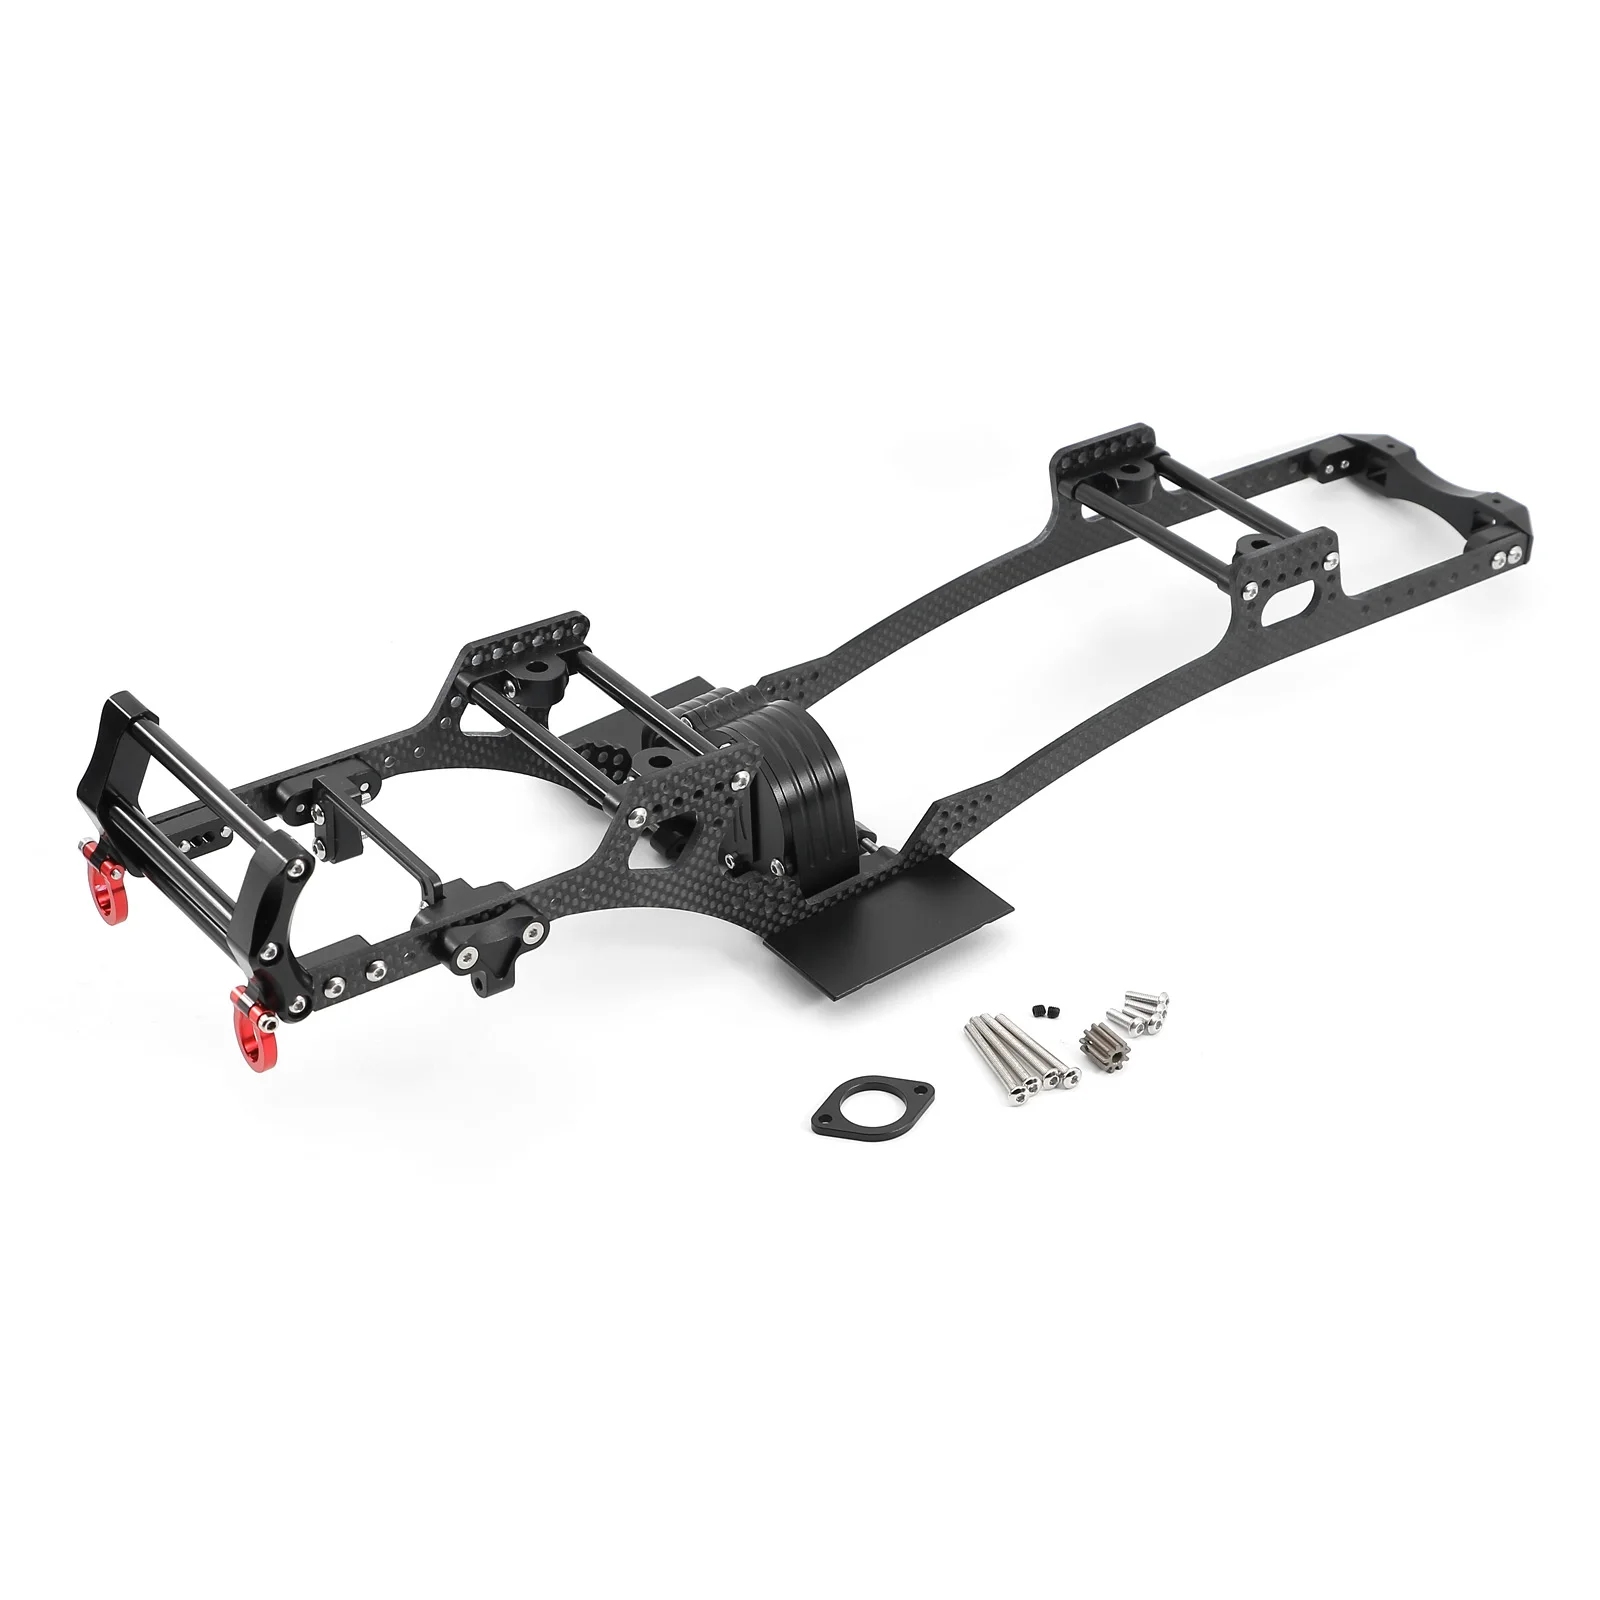 Carbon Fiber LCG Chassis Kit Frame Rail V2 Gearbox Skid Plate Bumper Set for Axial SCX10 1/10 RC Crawler Car DIY Upgrade Parts